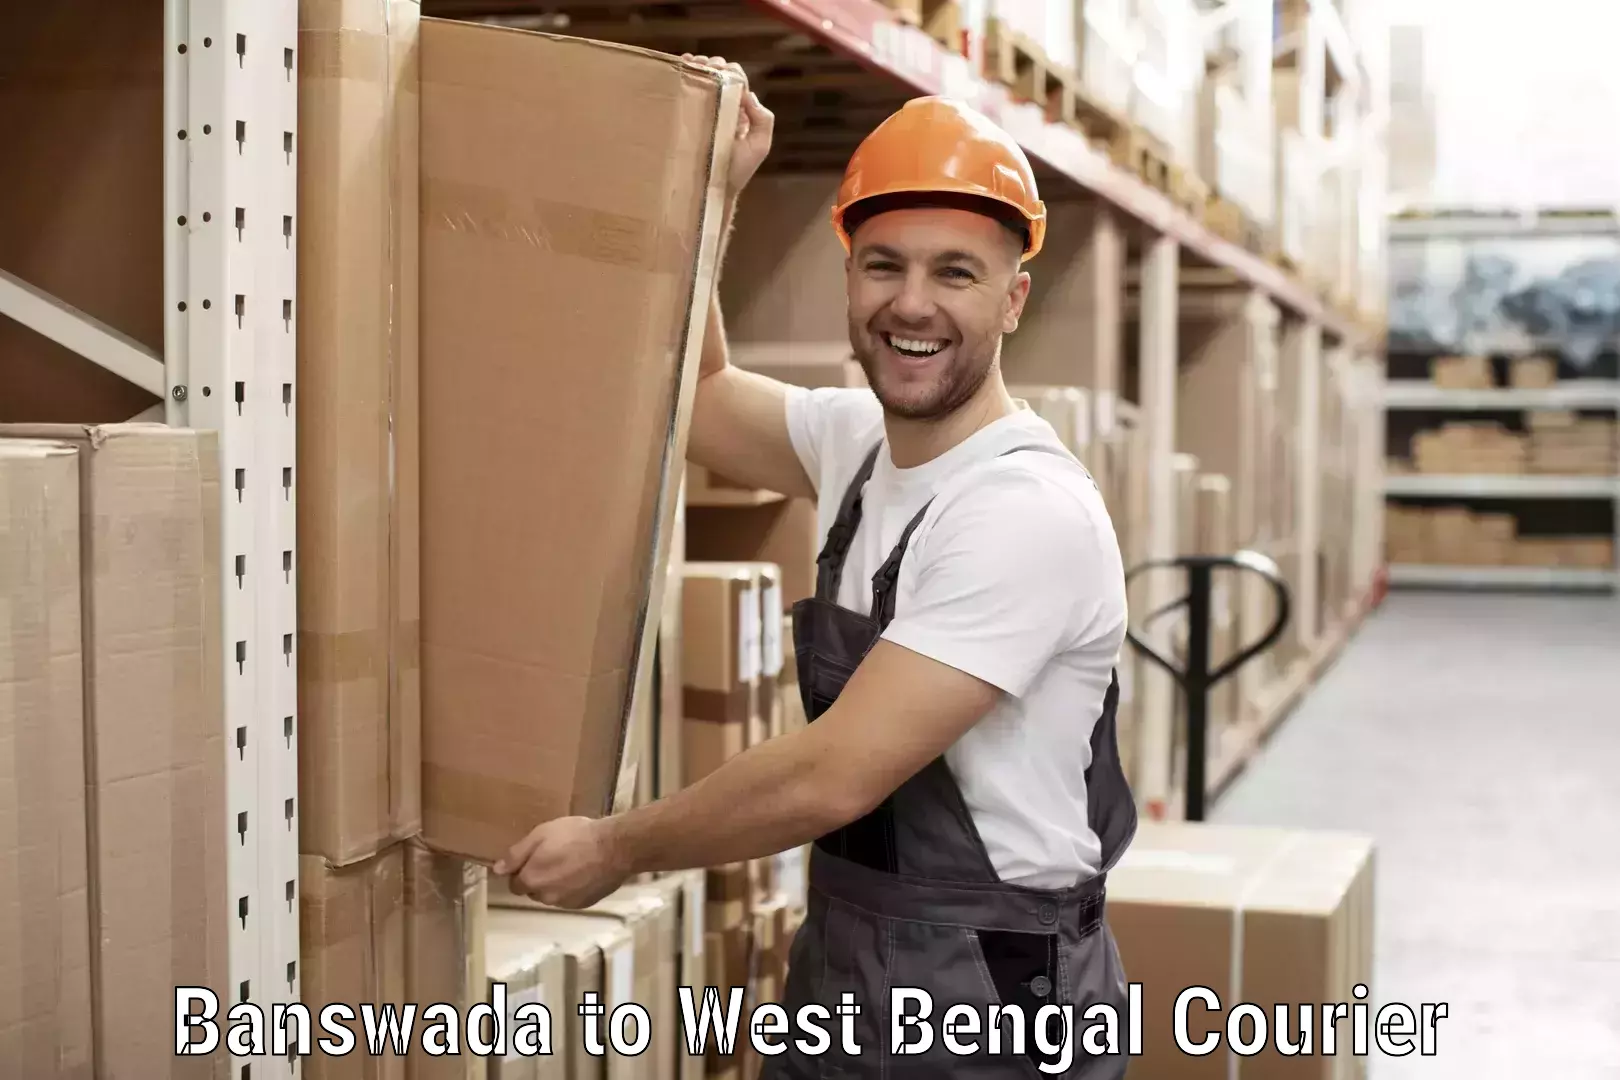 Next-day delivery options Banswada to Khanakul